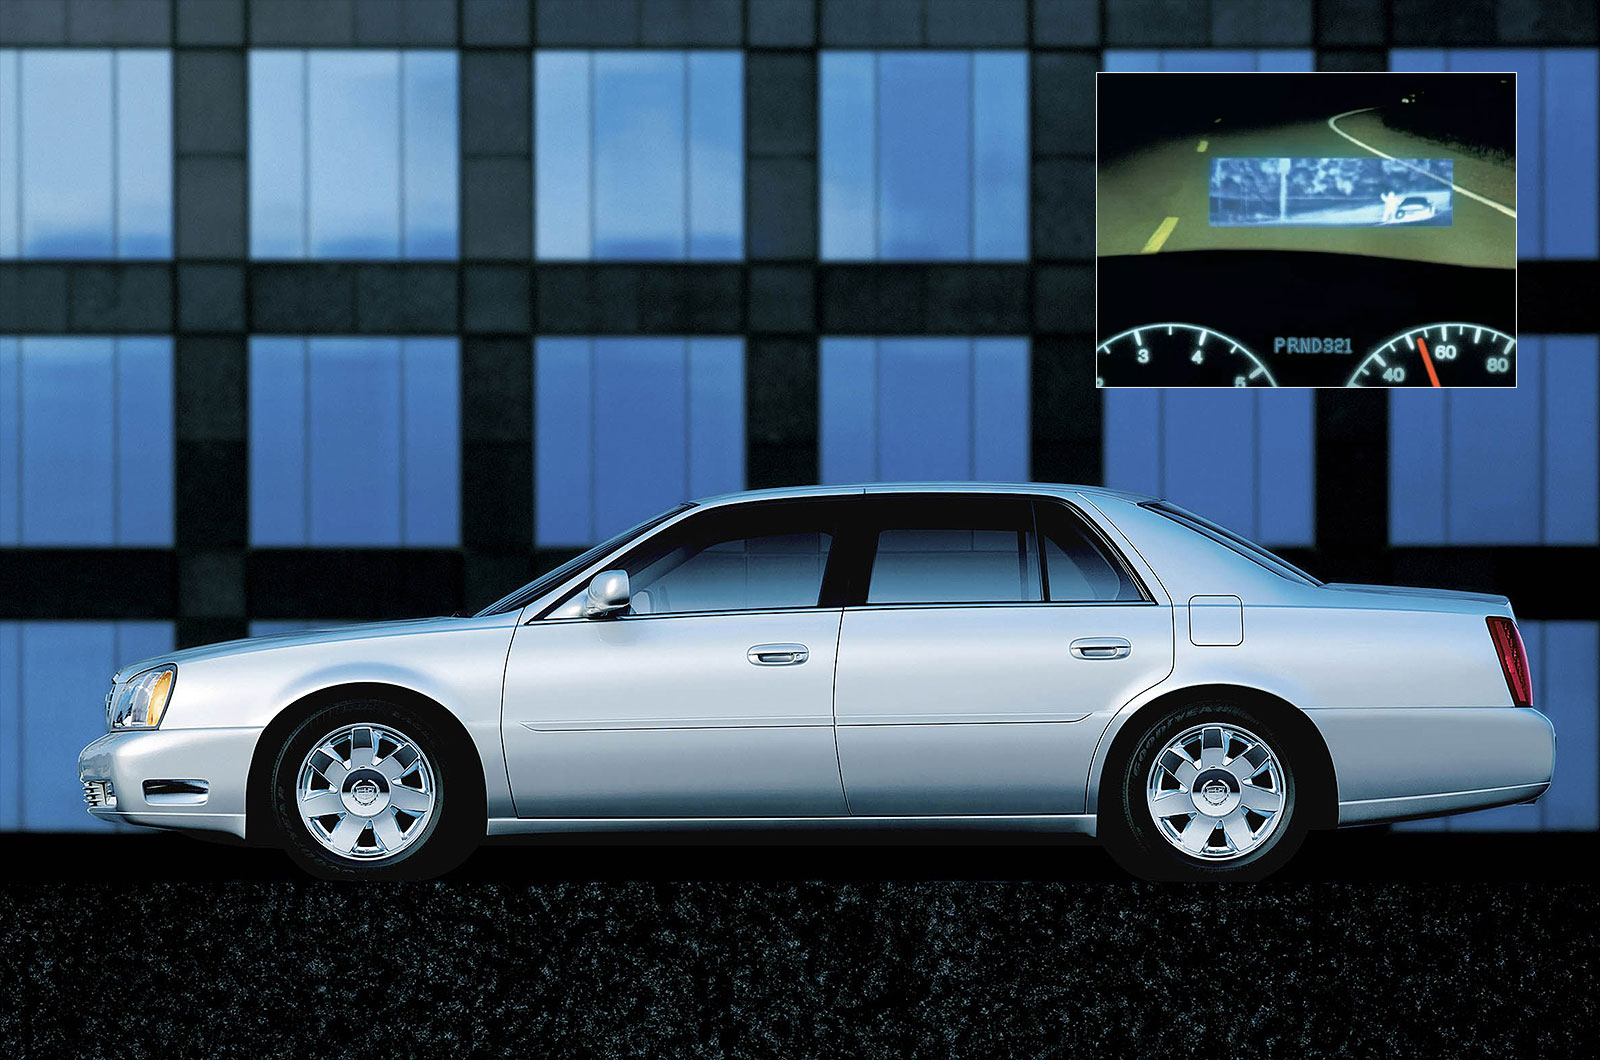 <p>In 2000 GM used technology from Raytheon to make <strong>Cadillac</strong> the first car to offer <strong>Night Vision</strong>, in posh versions of the <strong>DeVille</strong>. It used an infra-red sensor to highlight objects of safety interest onto a monochrome Heads Up Display. Take-up of the $1995 option was brisk at first – 7000 in the first year, but this dropped to just 600 in 2004, and the option was dropped in 2005; Cadillac didn’t return to the Night Vision scene until 2015, with its CT6 flagship.</p><p>In the meantime, the largest German manufacturers among others had launched increasingly sophisticated night vision systems. They were and remain pricey options - <strong>£2250</strong> and US$2260 on the current Mercedes S-Class, for example. Opinion on them is somewhat divided, but they are certainly becoming more intelligent.</p><p><strong>GROUNDBREAKER SCORE: 5 - </strong>If and when cars become fully autonomous, the ability for the car to ‘see’ will become vital.</p>